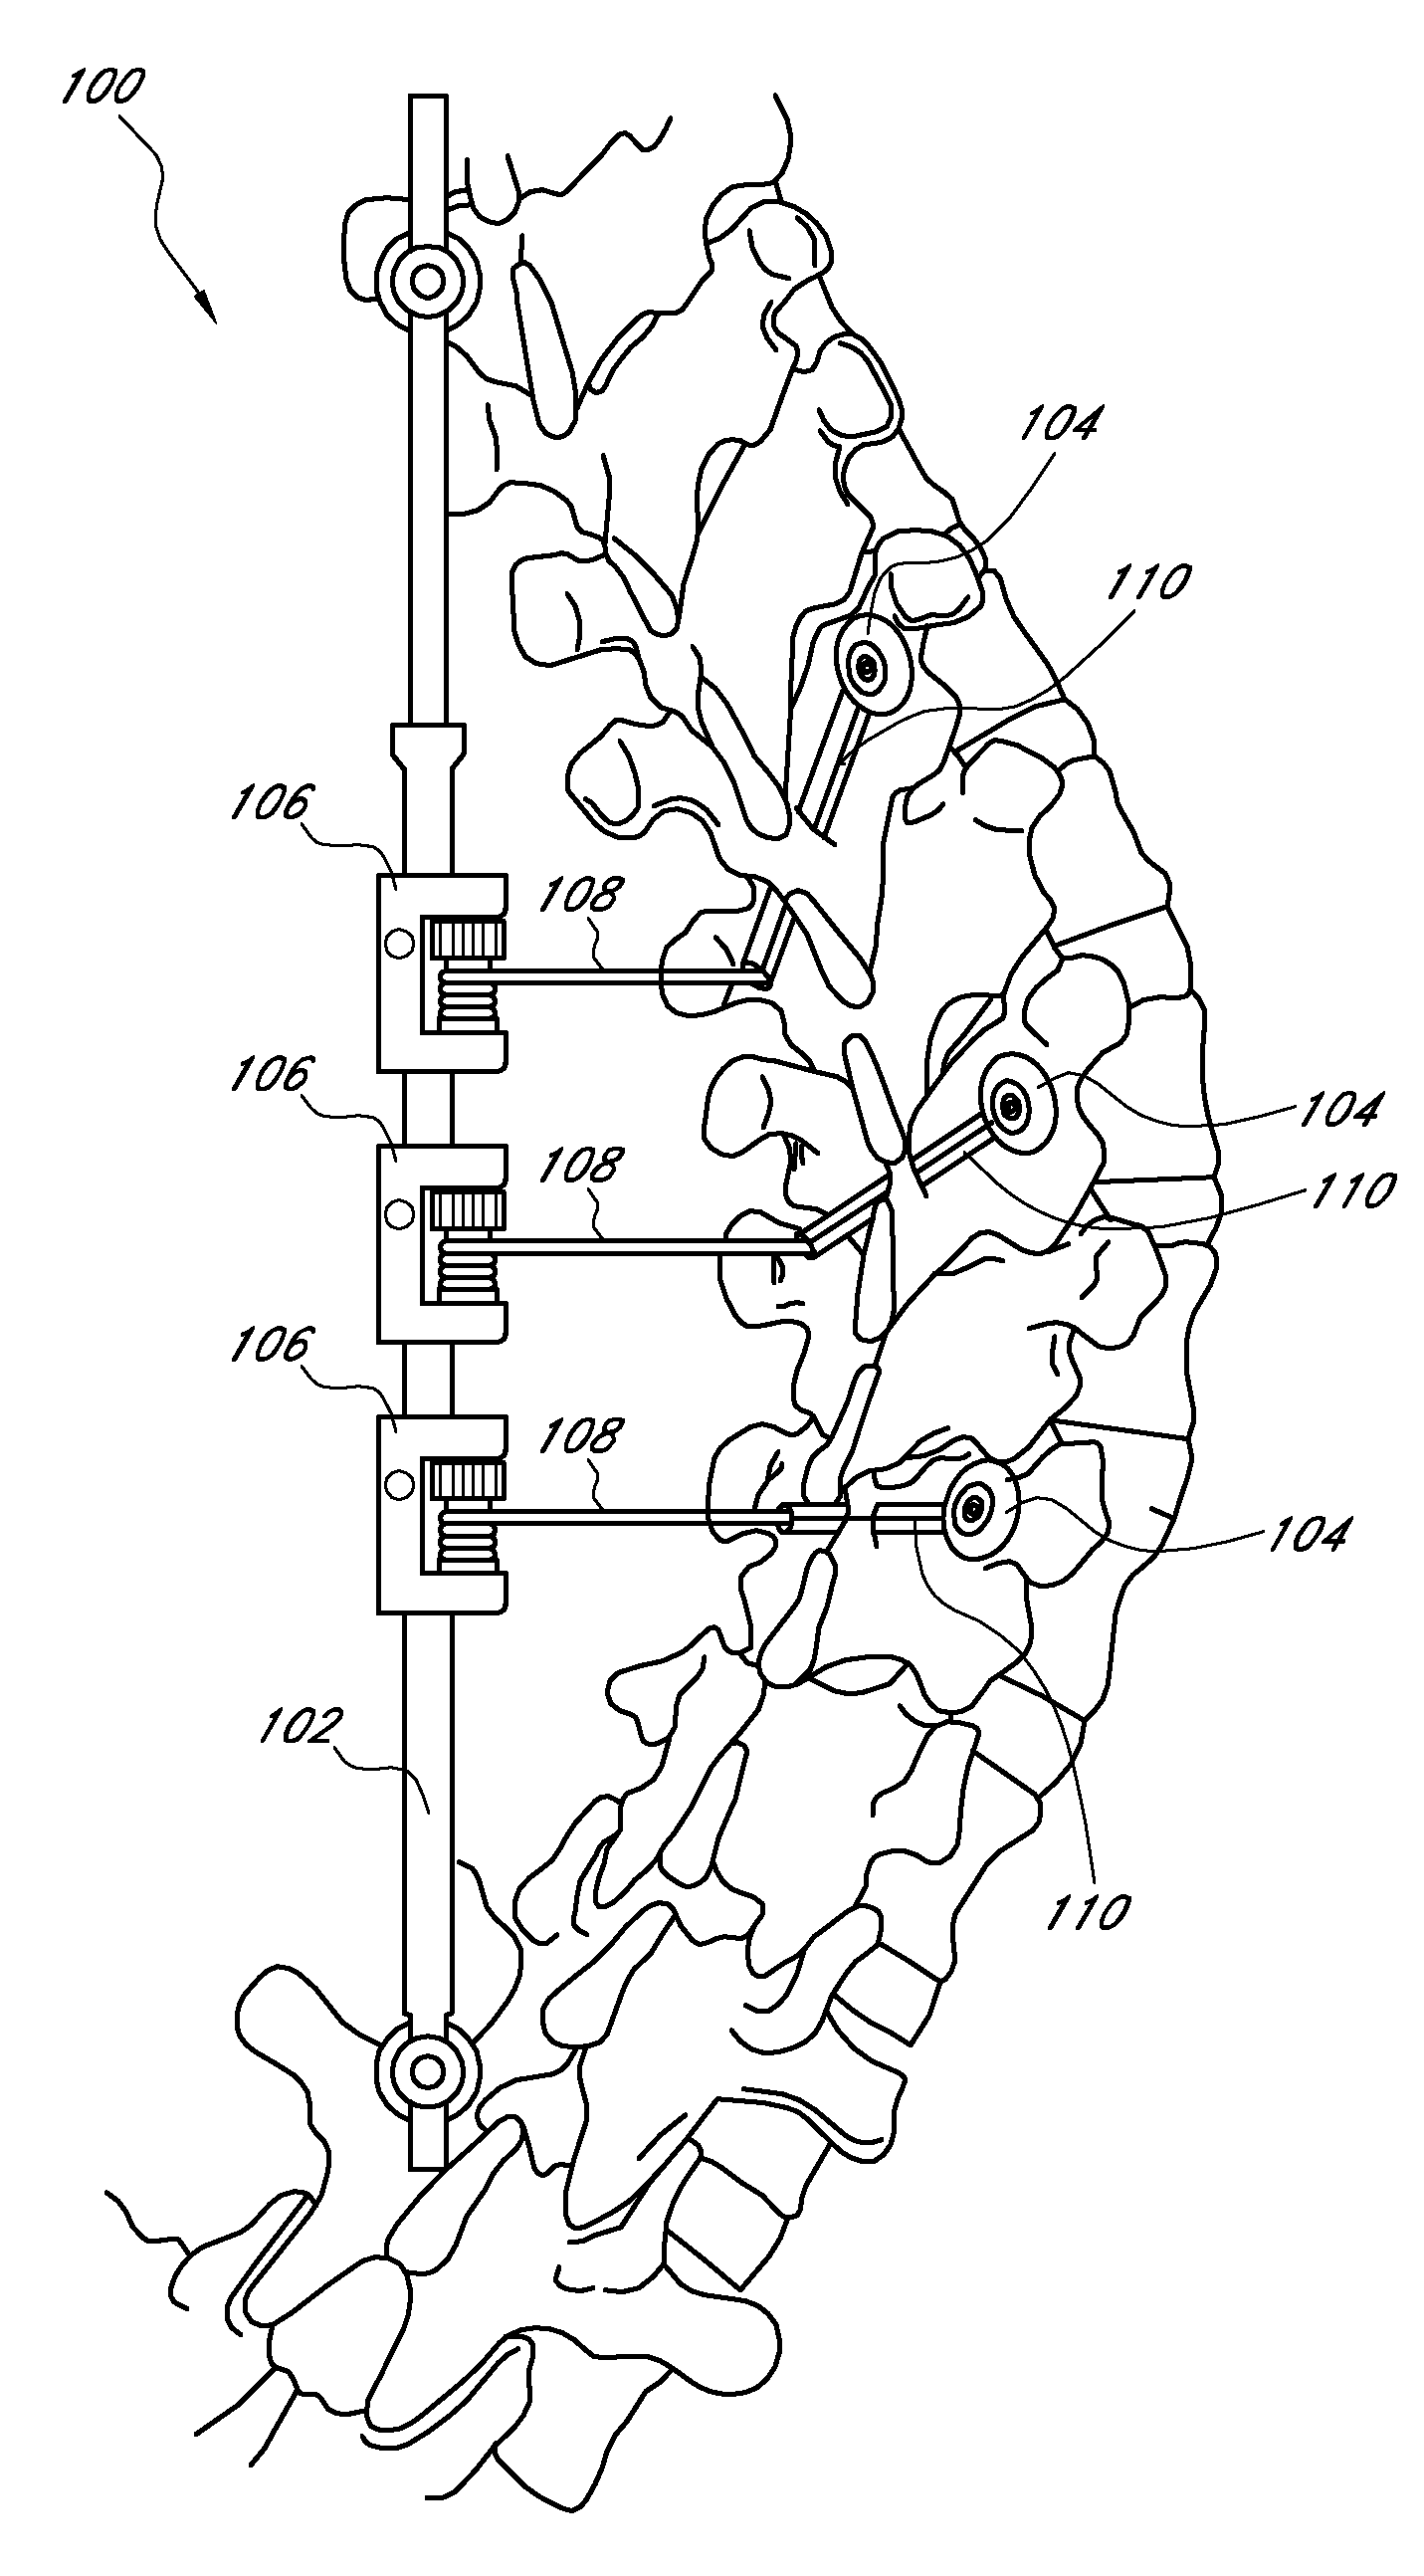 Medical device and method to correct deformity